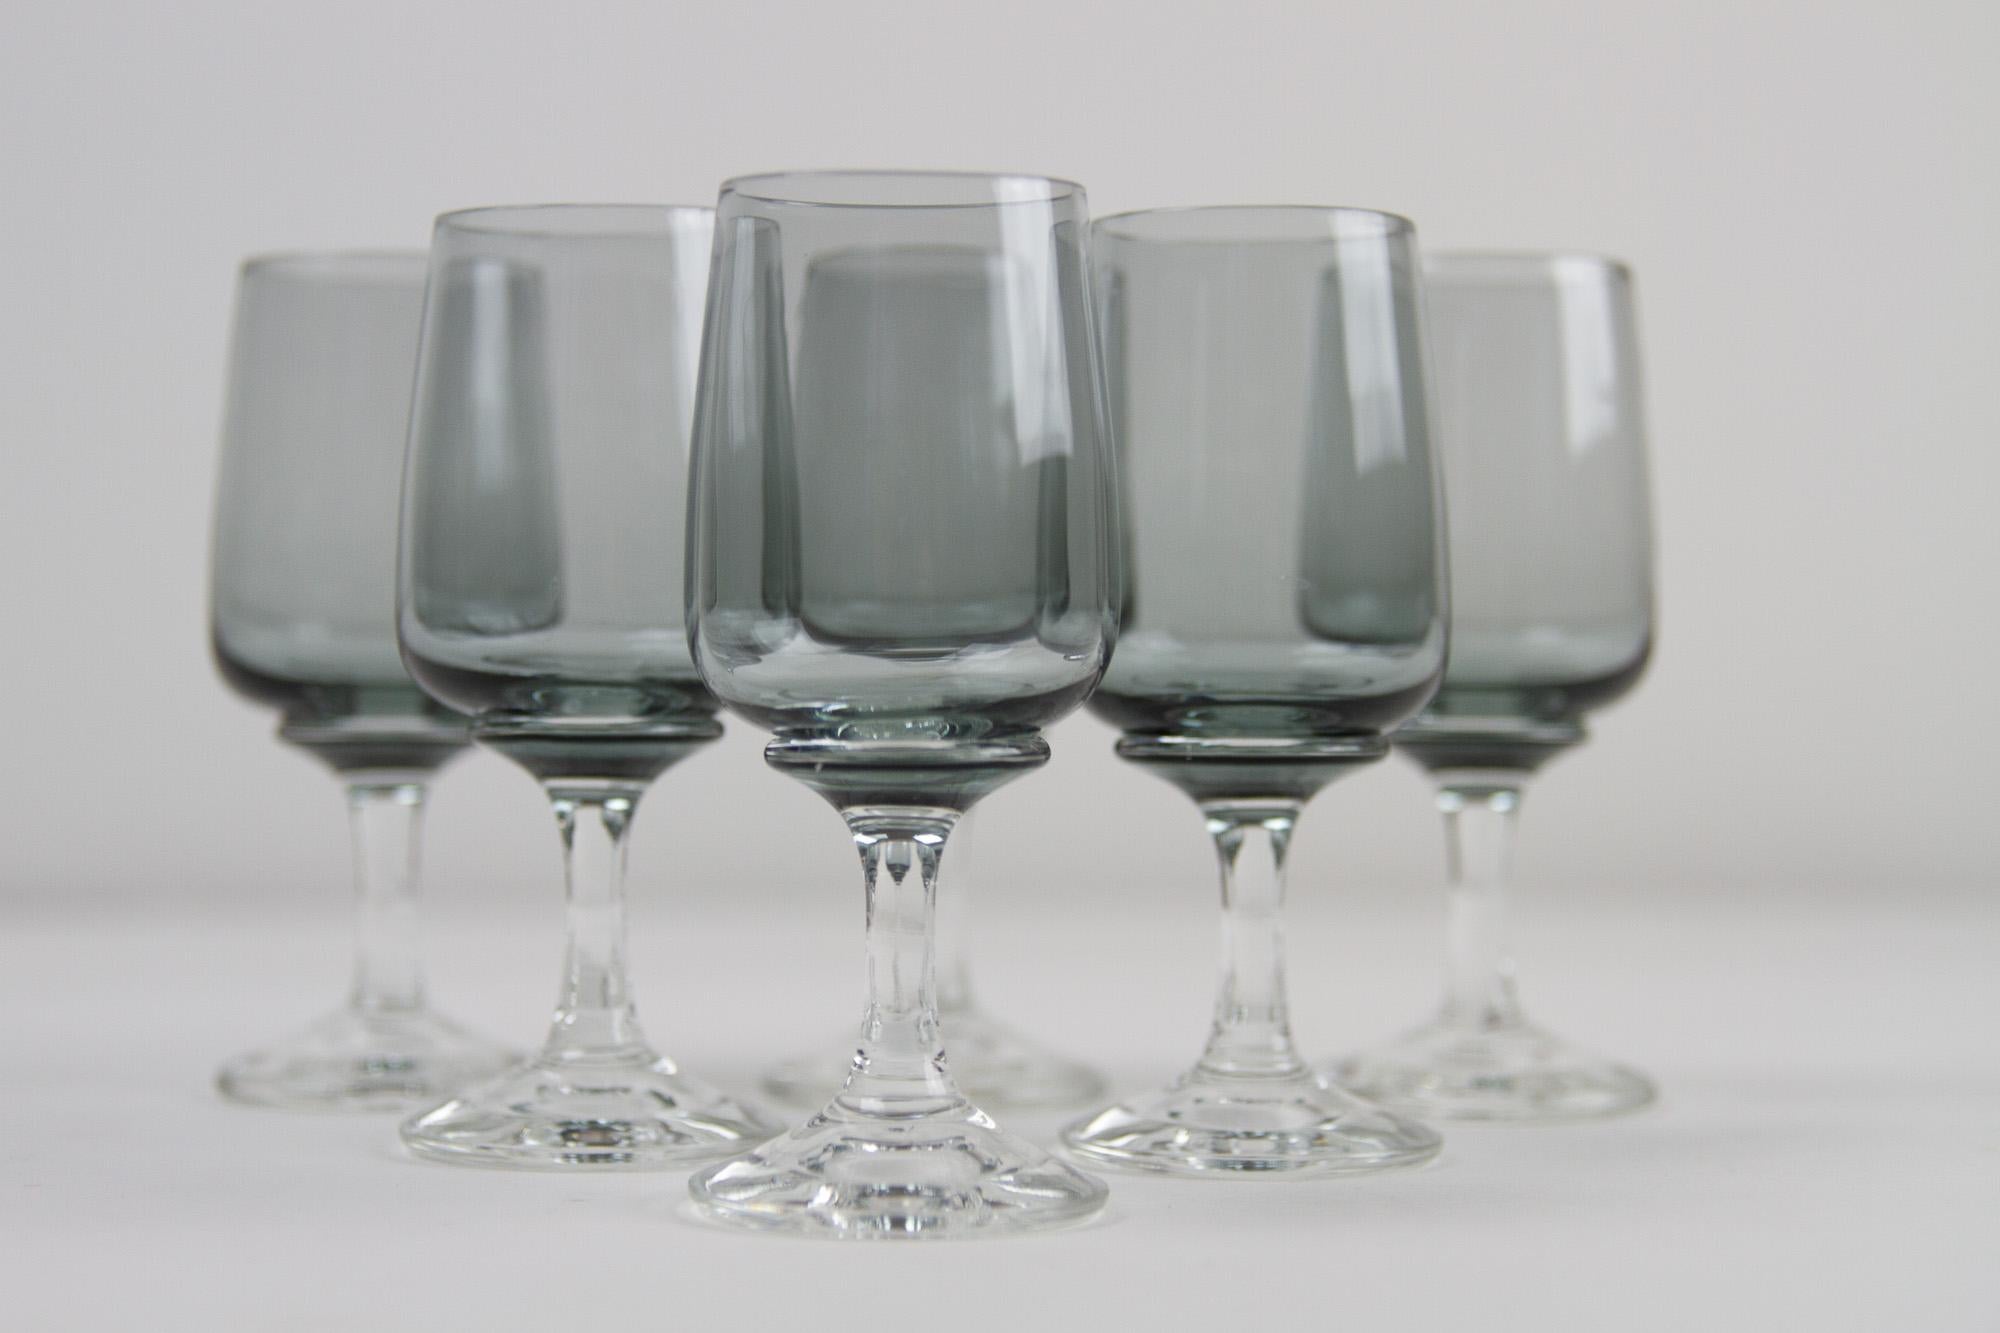 Vintage Danish Holmegaard Atlantic Snaps Glasses, 1960s. Set of 6.
Set of 6 beautiful hand-blown vintage drinking glasses from Danish glasswork Holmegaard designed by Per Lütken in 1962. These were only manufactured between 1962 and 1975. 
The top